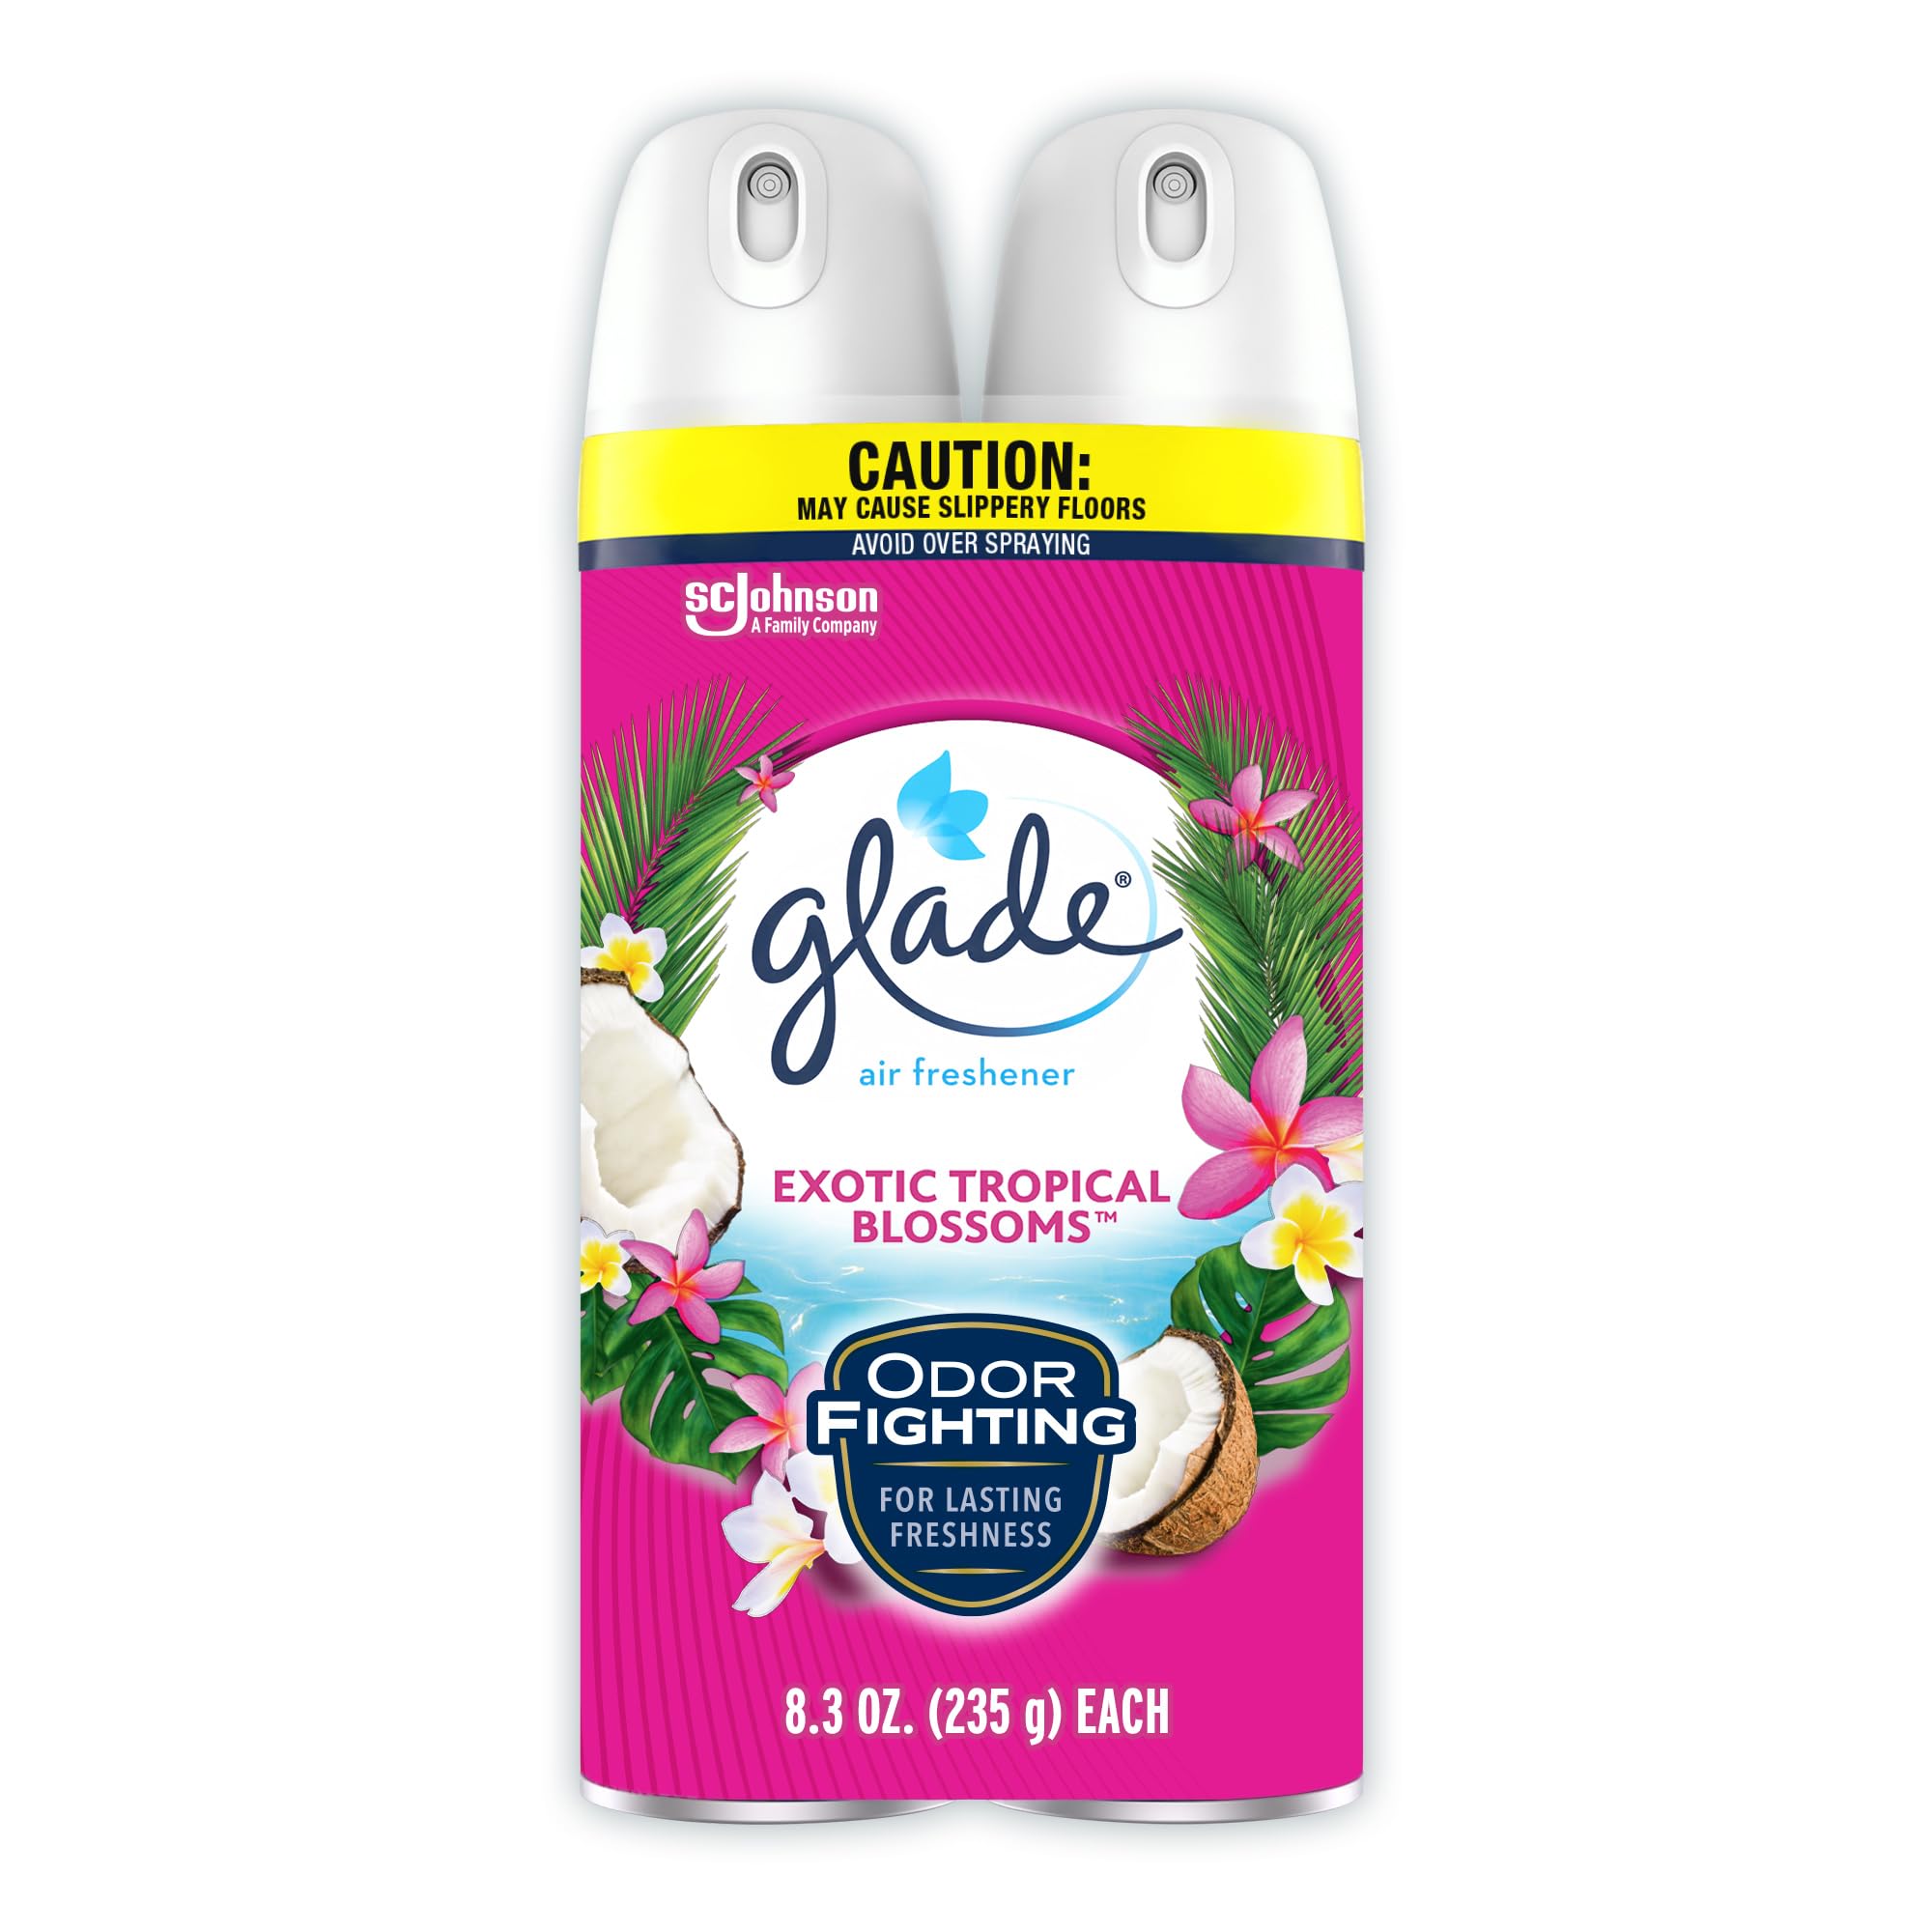 2-Pack 8.3-Oz Glade Air Freshener Spray (Exotic Tropical Blossoms) $4.09 w/ S&S + Free Shipping w/ Prime or on orders over $35